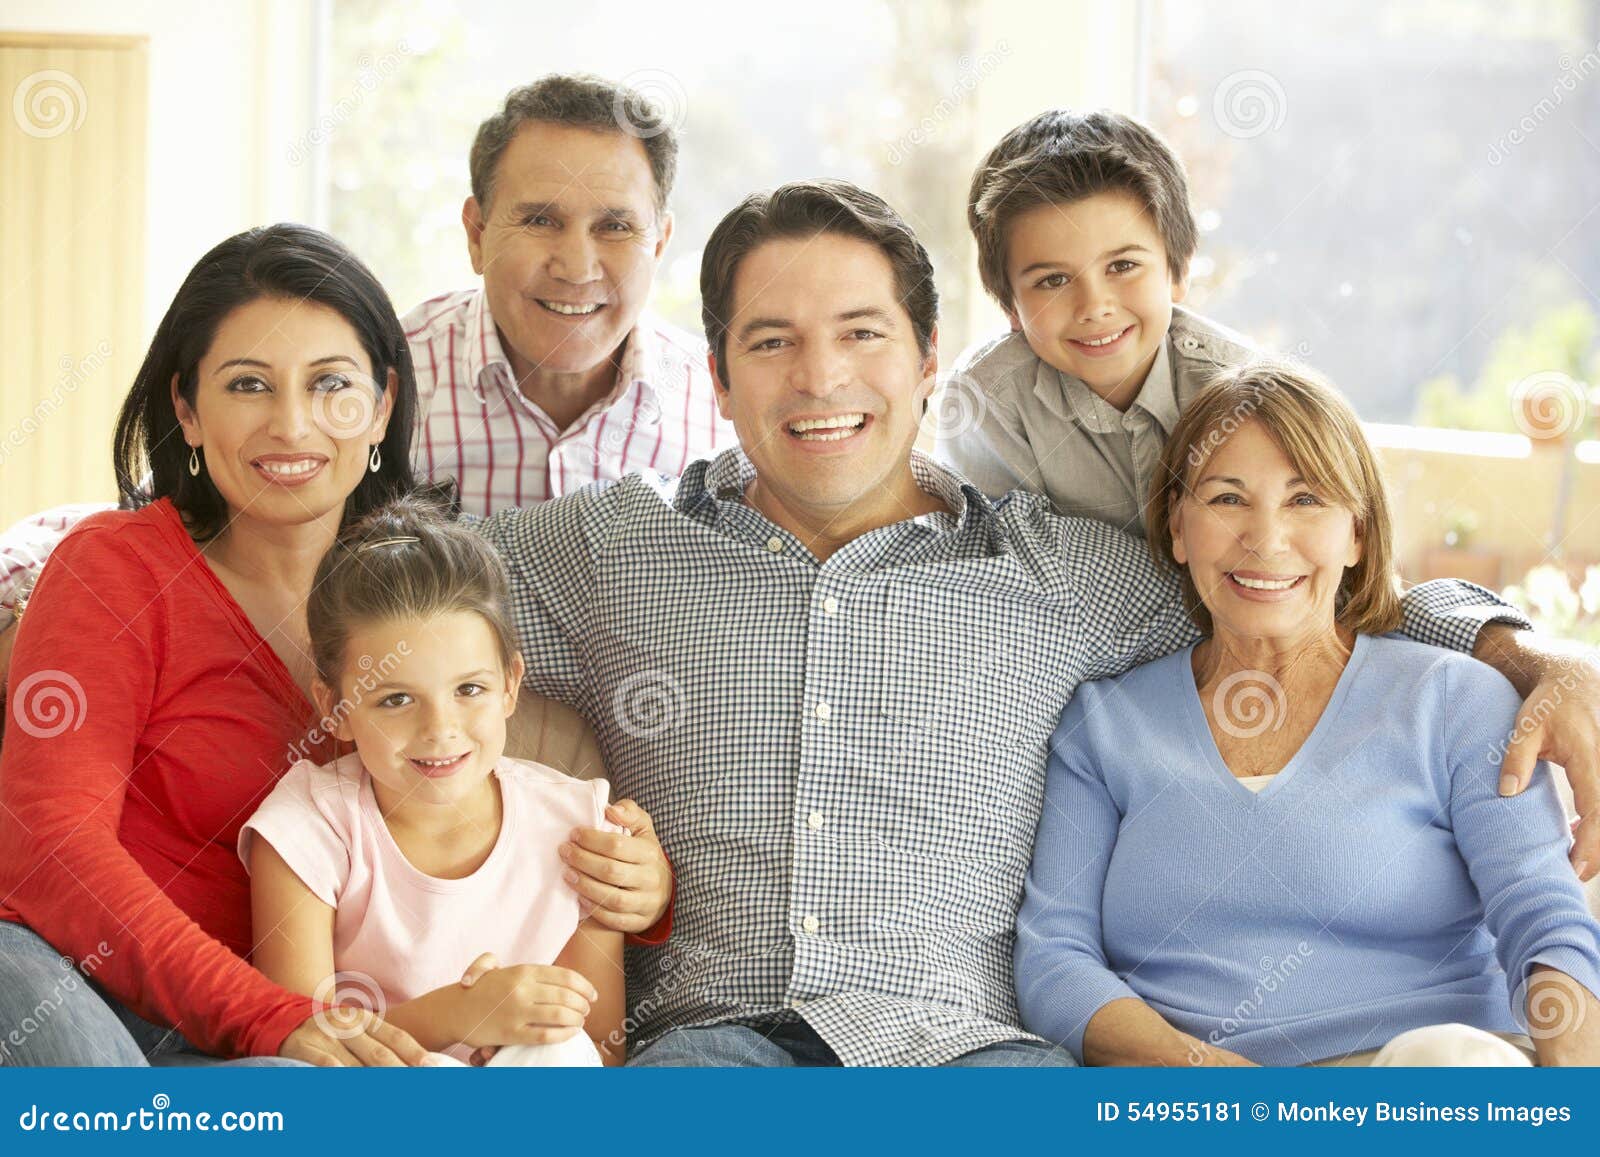 portrait of extended hispanic family relaxing at home